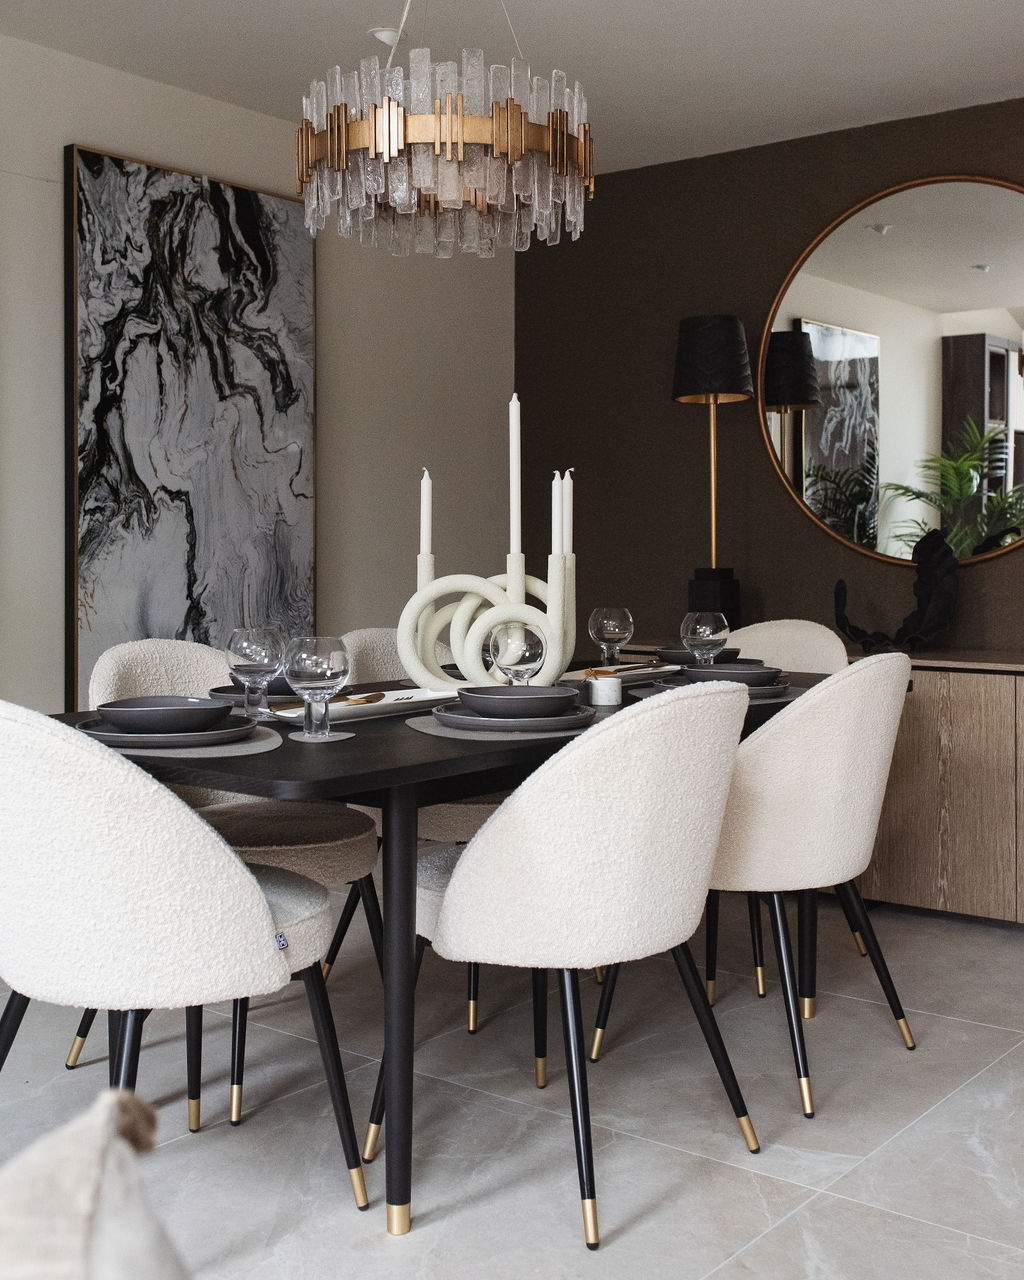 interior design case study image of a dining area with table and six chairs